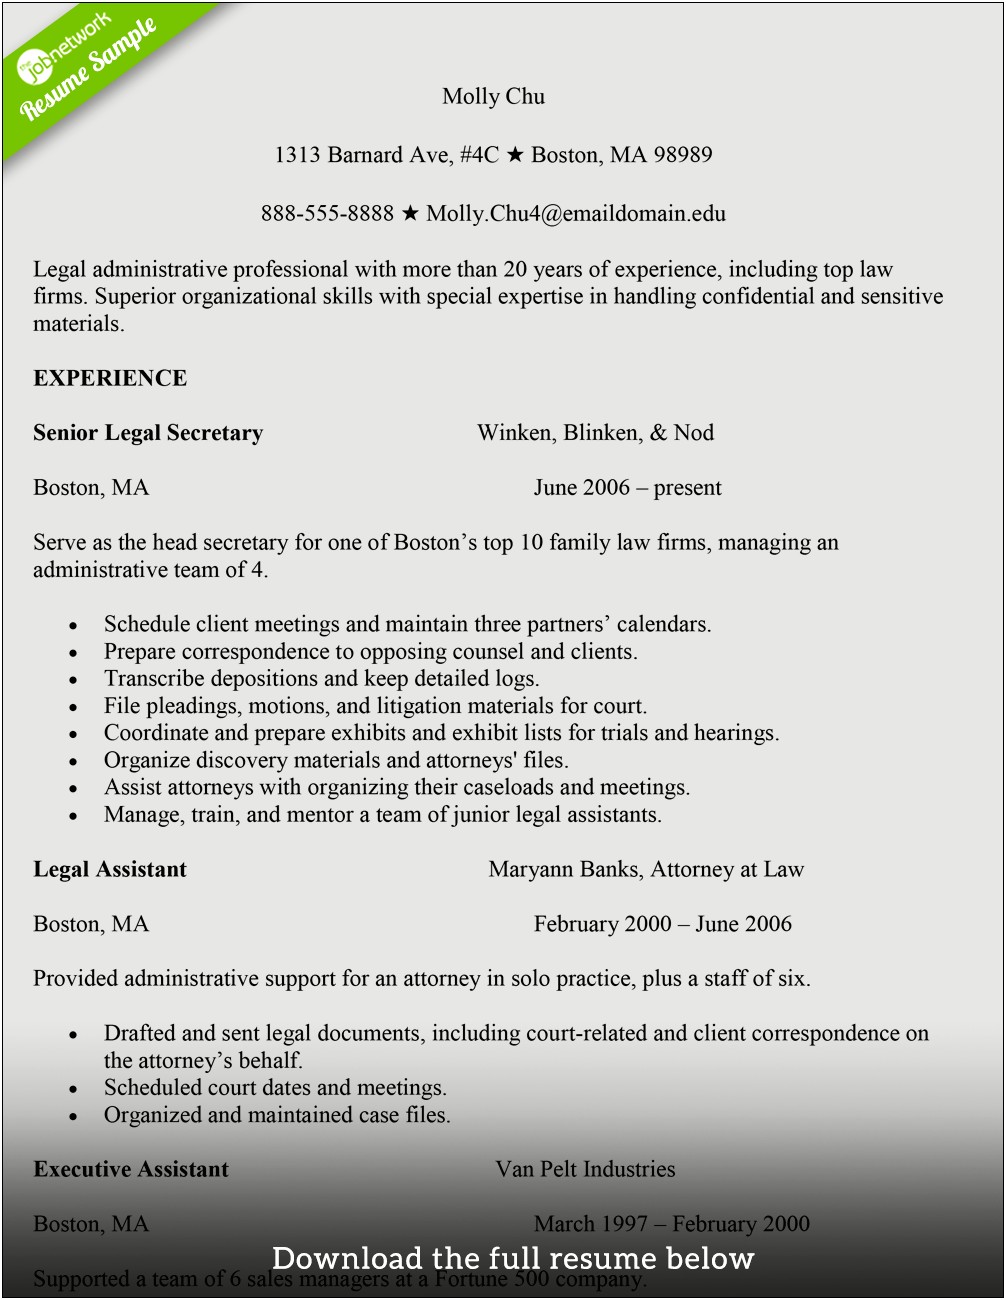 Resume Objective For Paralegal Student